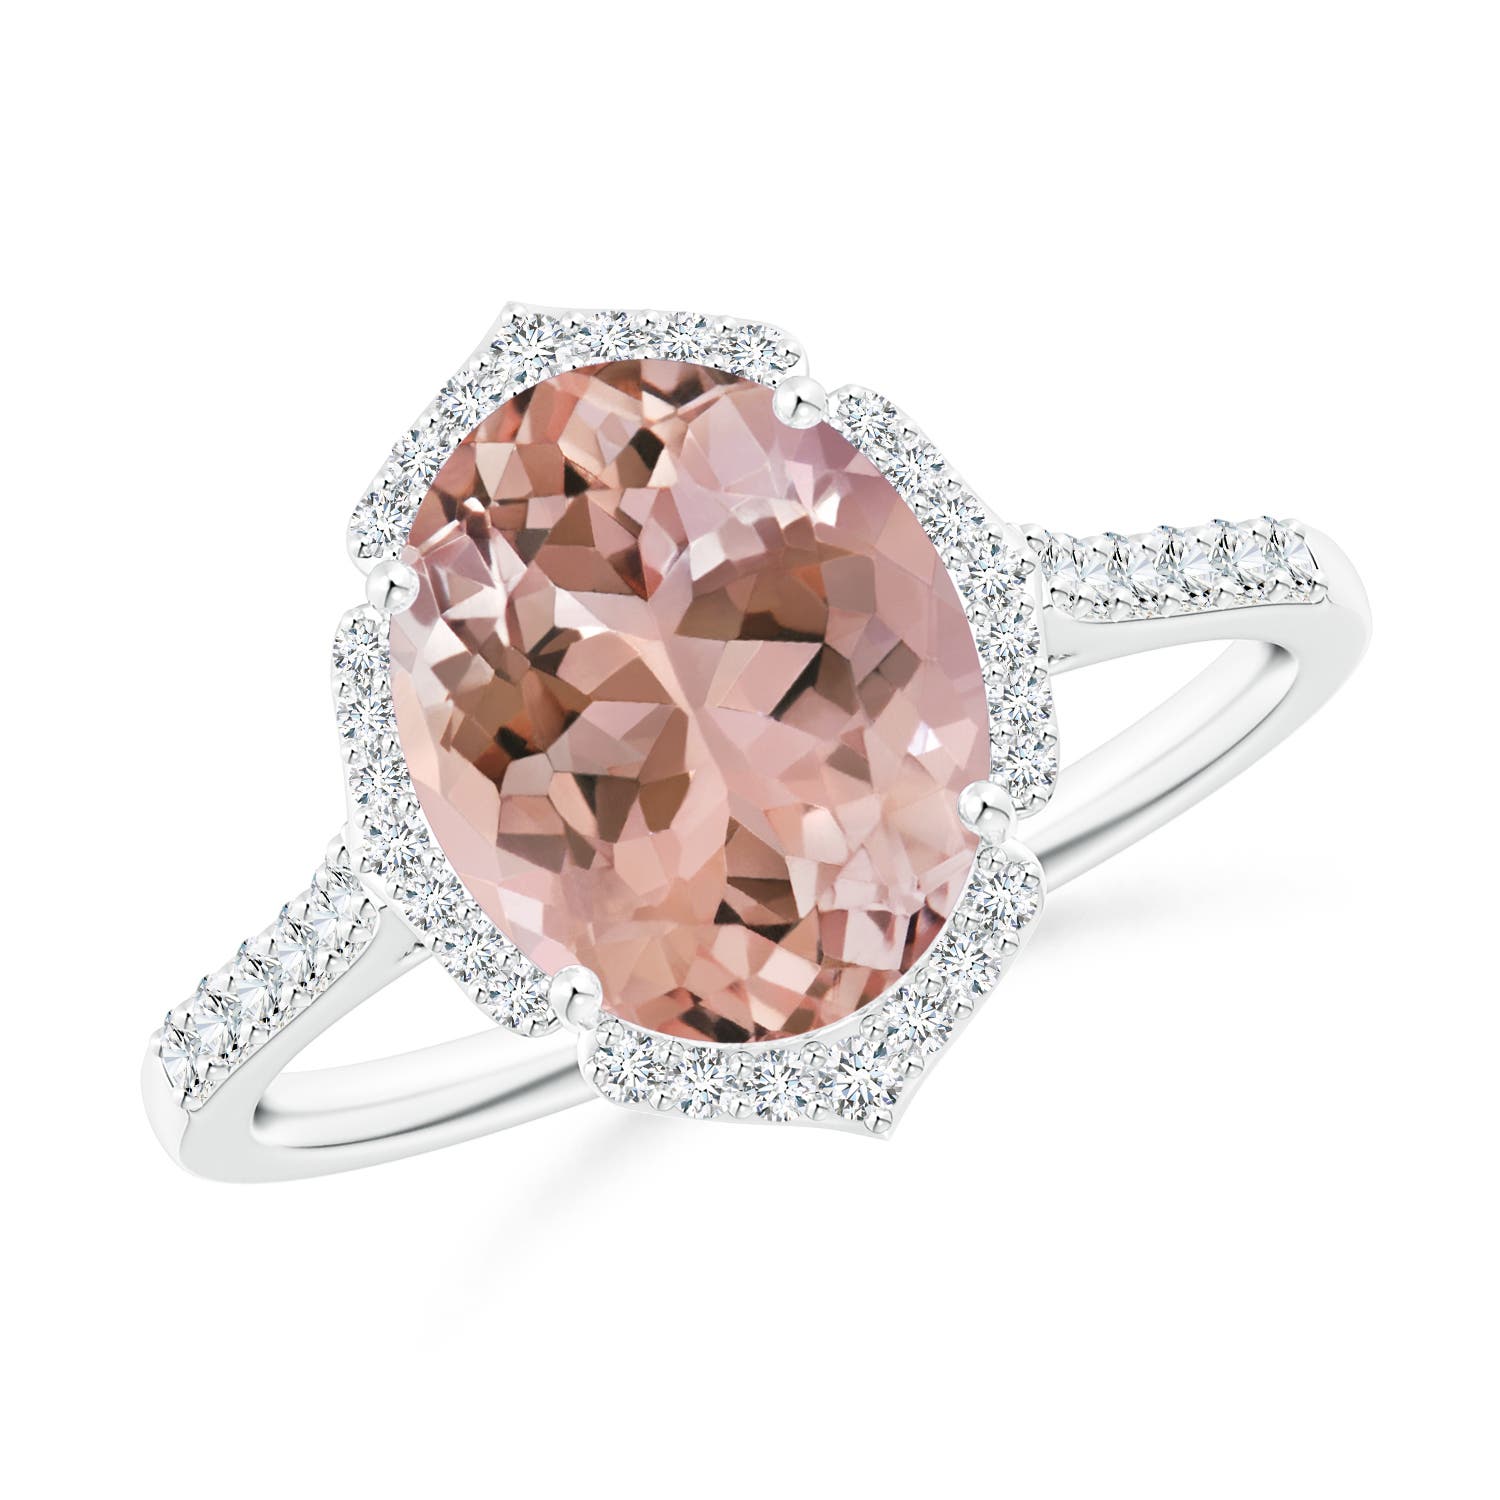 Oval Morganite Ring with Ornate Halo